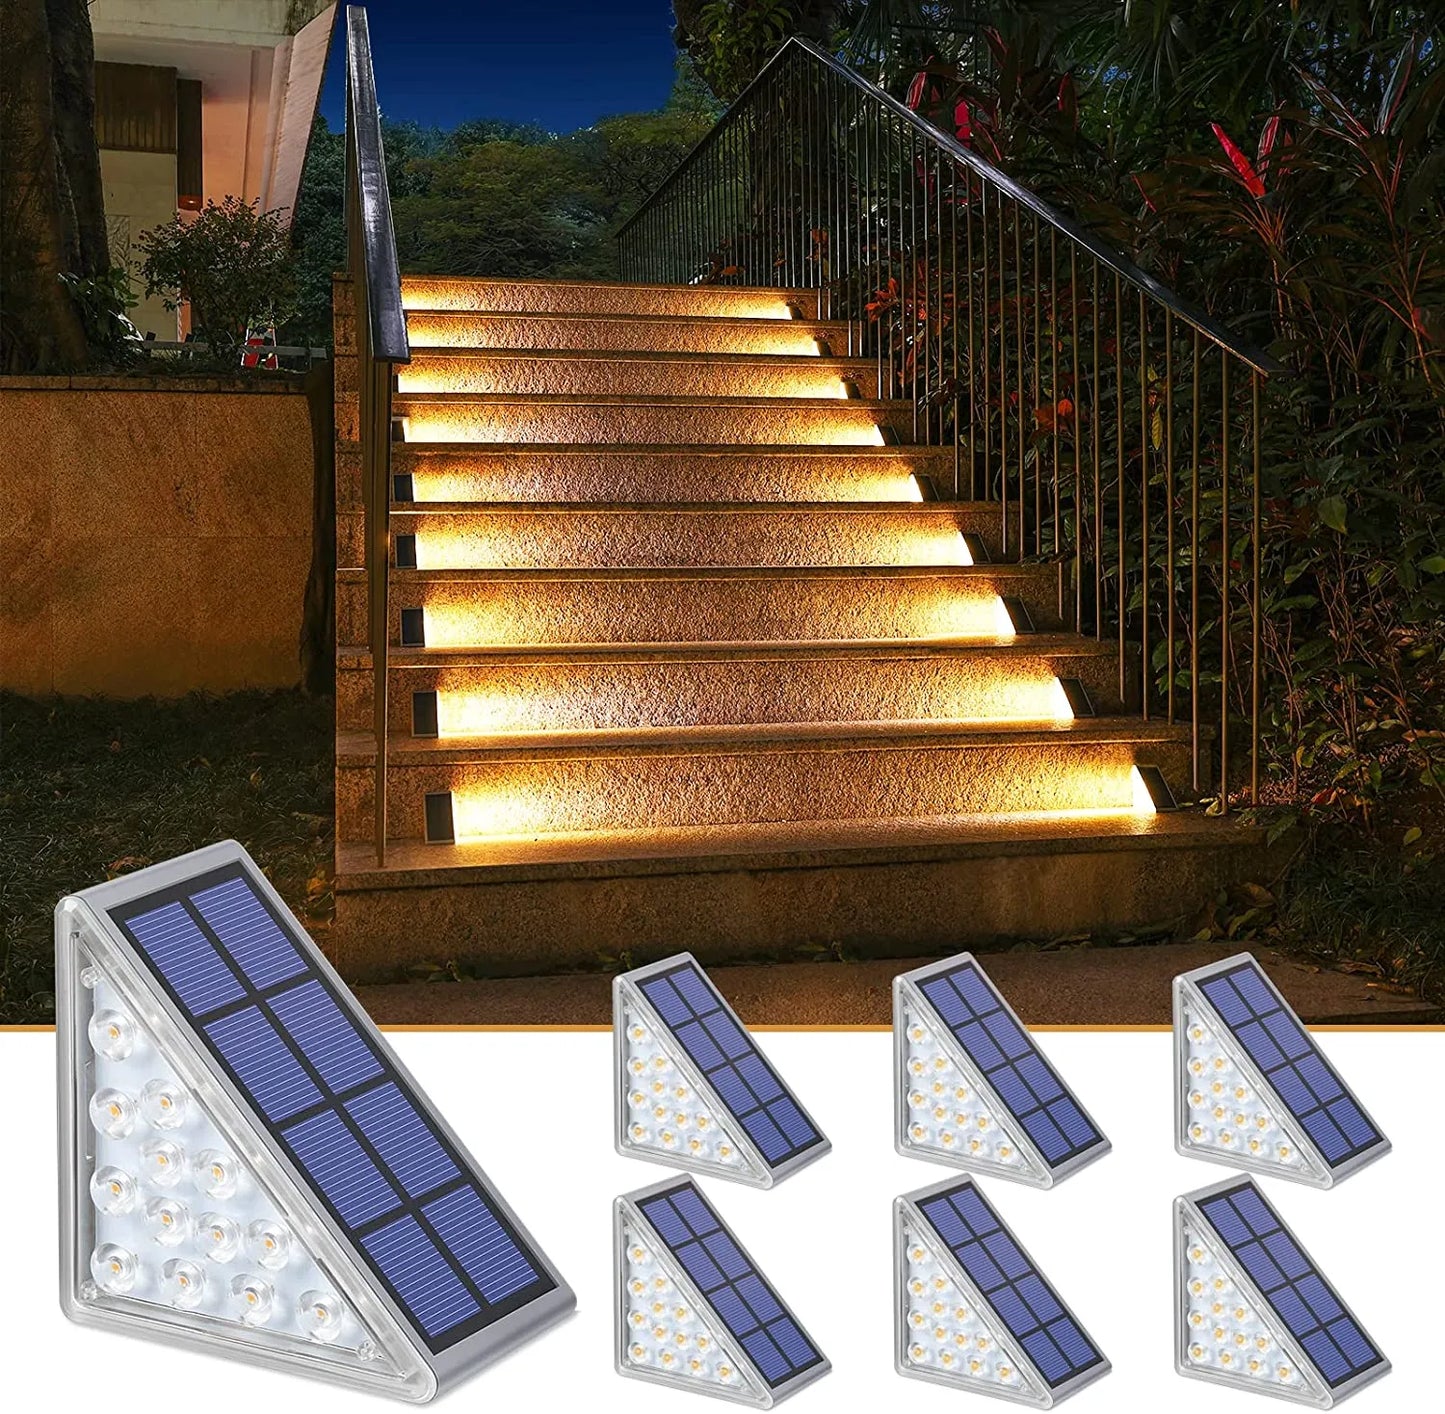 LED Step Lamp Stair Light Outdoor IP67 Waterproof Solar Light With Lens Anti-theft Design Decor Lighting For Garden Deck Path